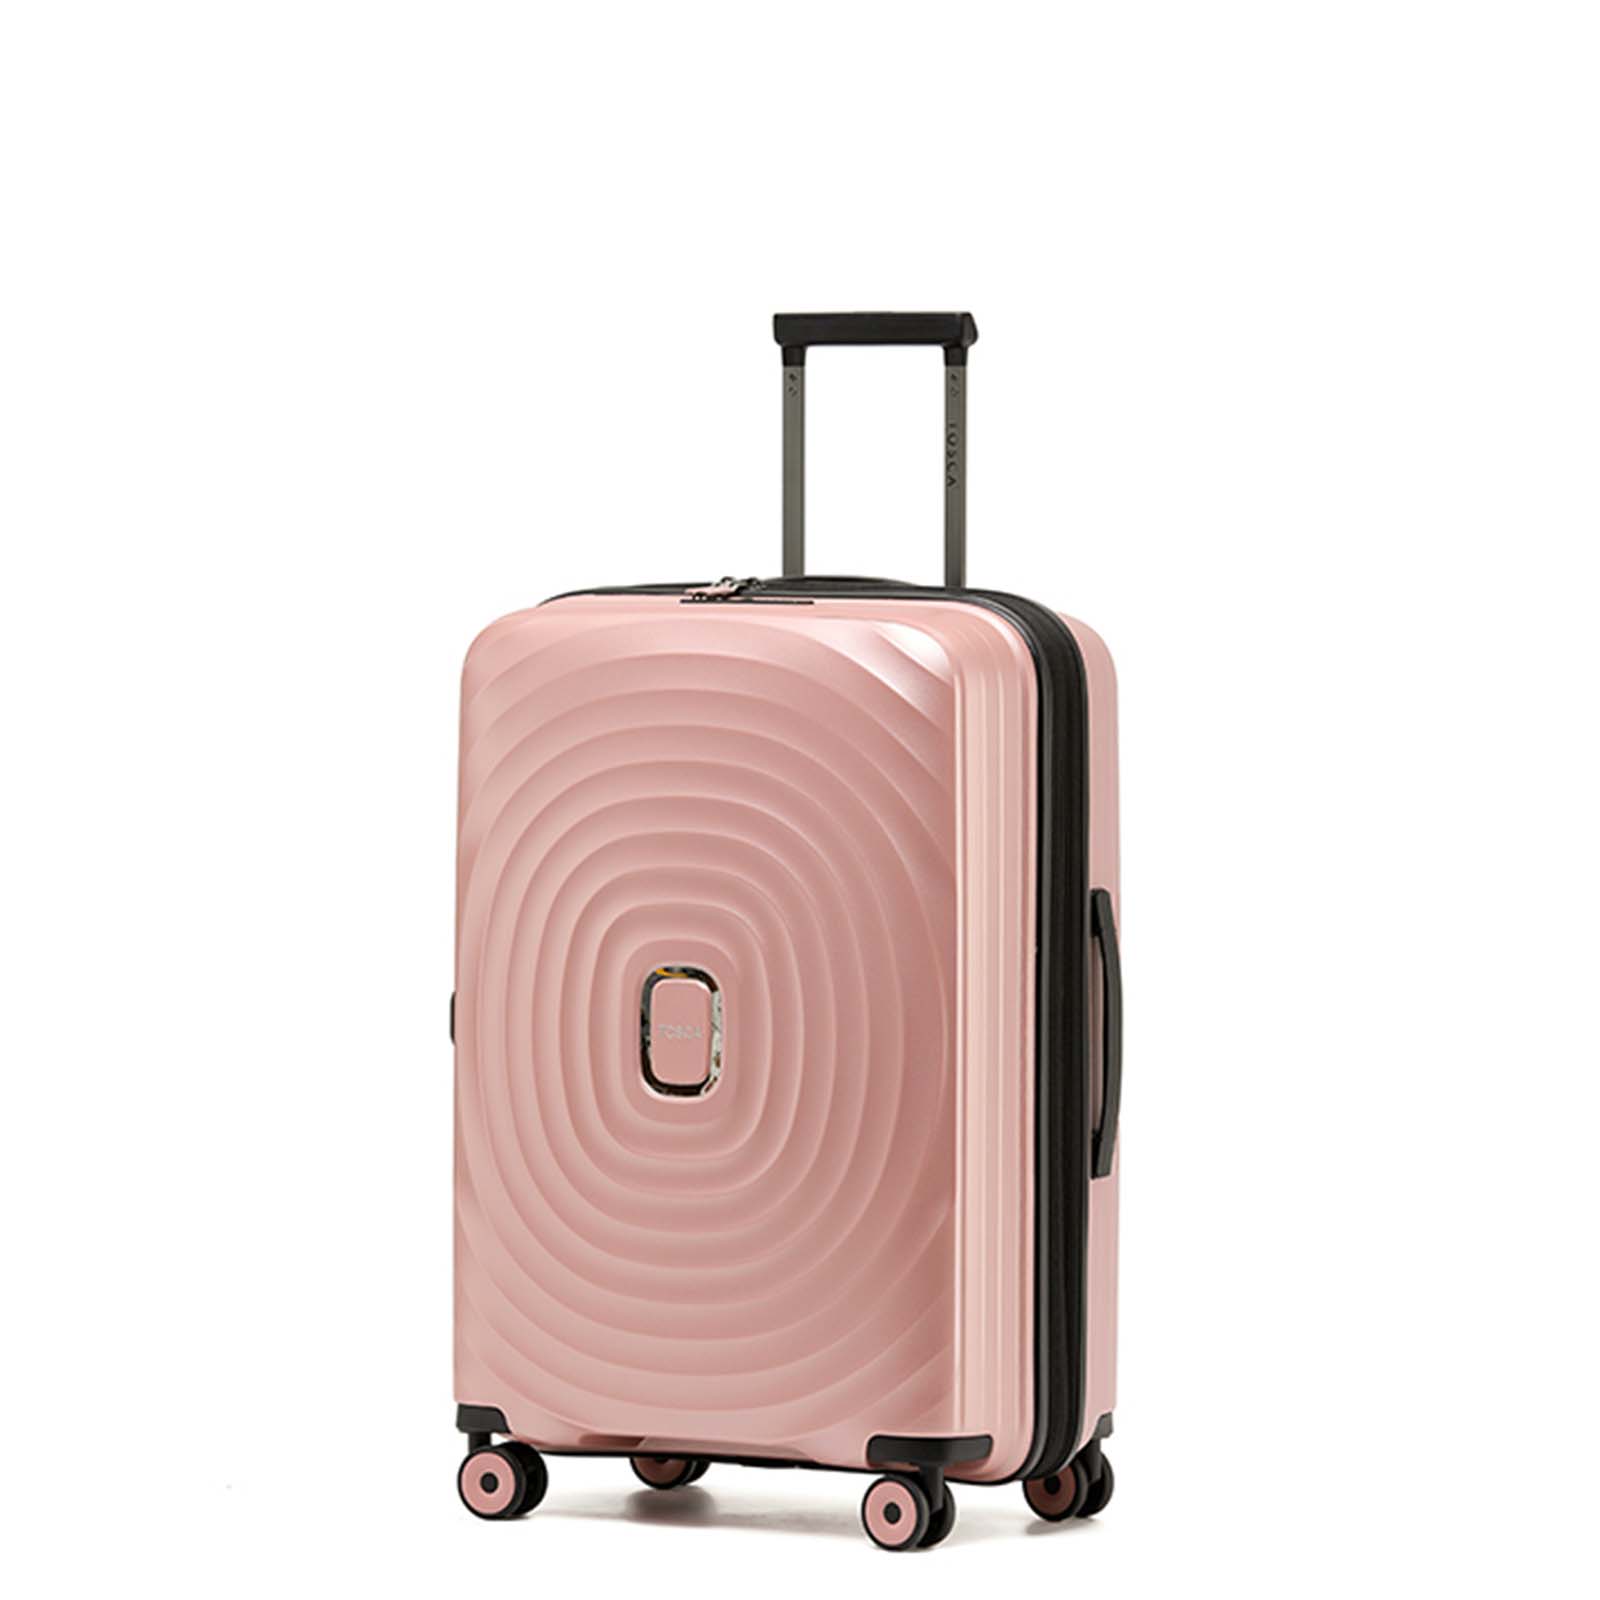 tosca-eclipse-4-wheel-67cm-medium-suitcase-rose-gold-front-angle